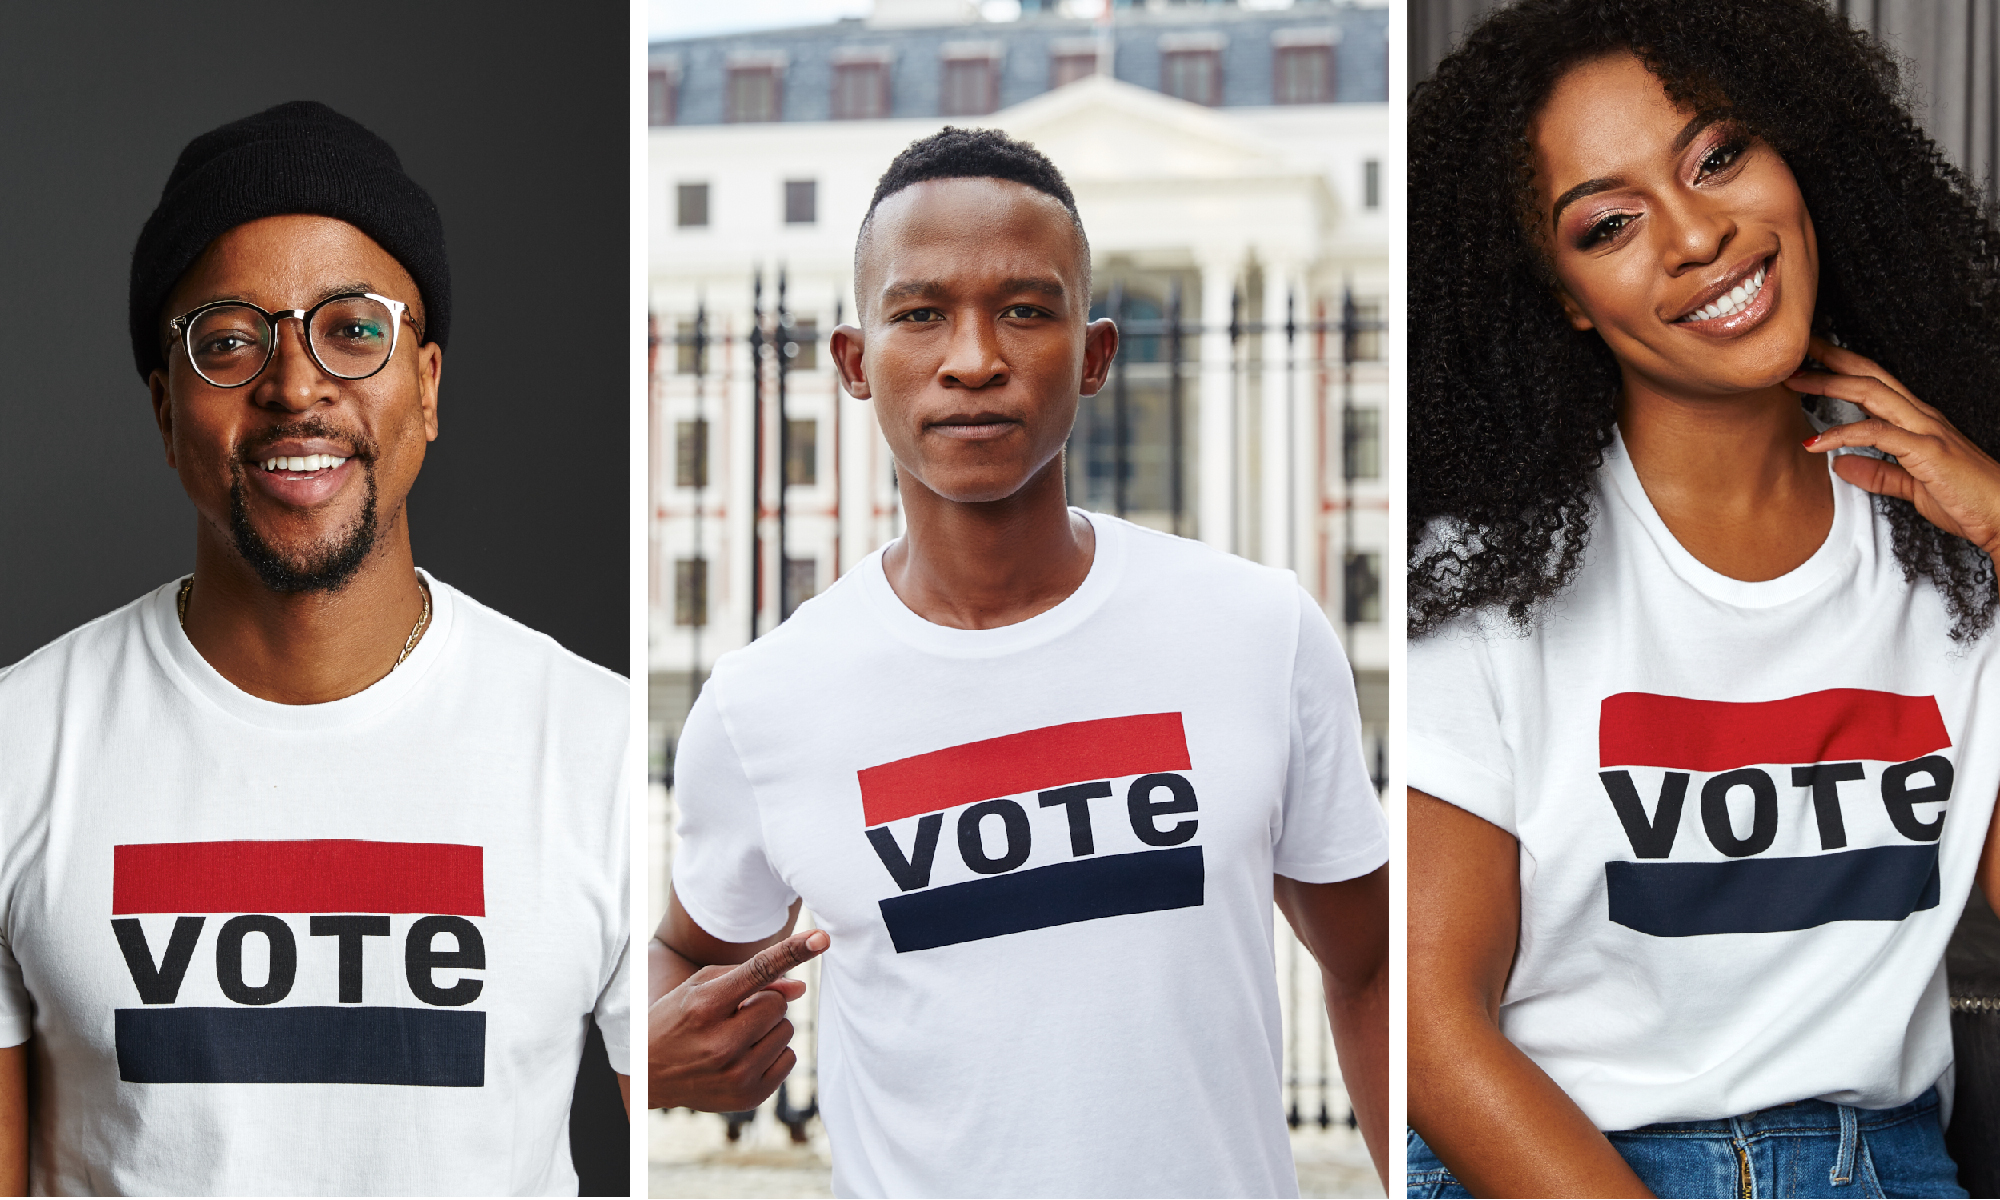 South Africa Vote campaign